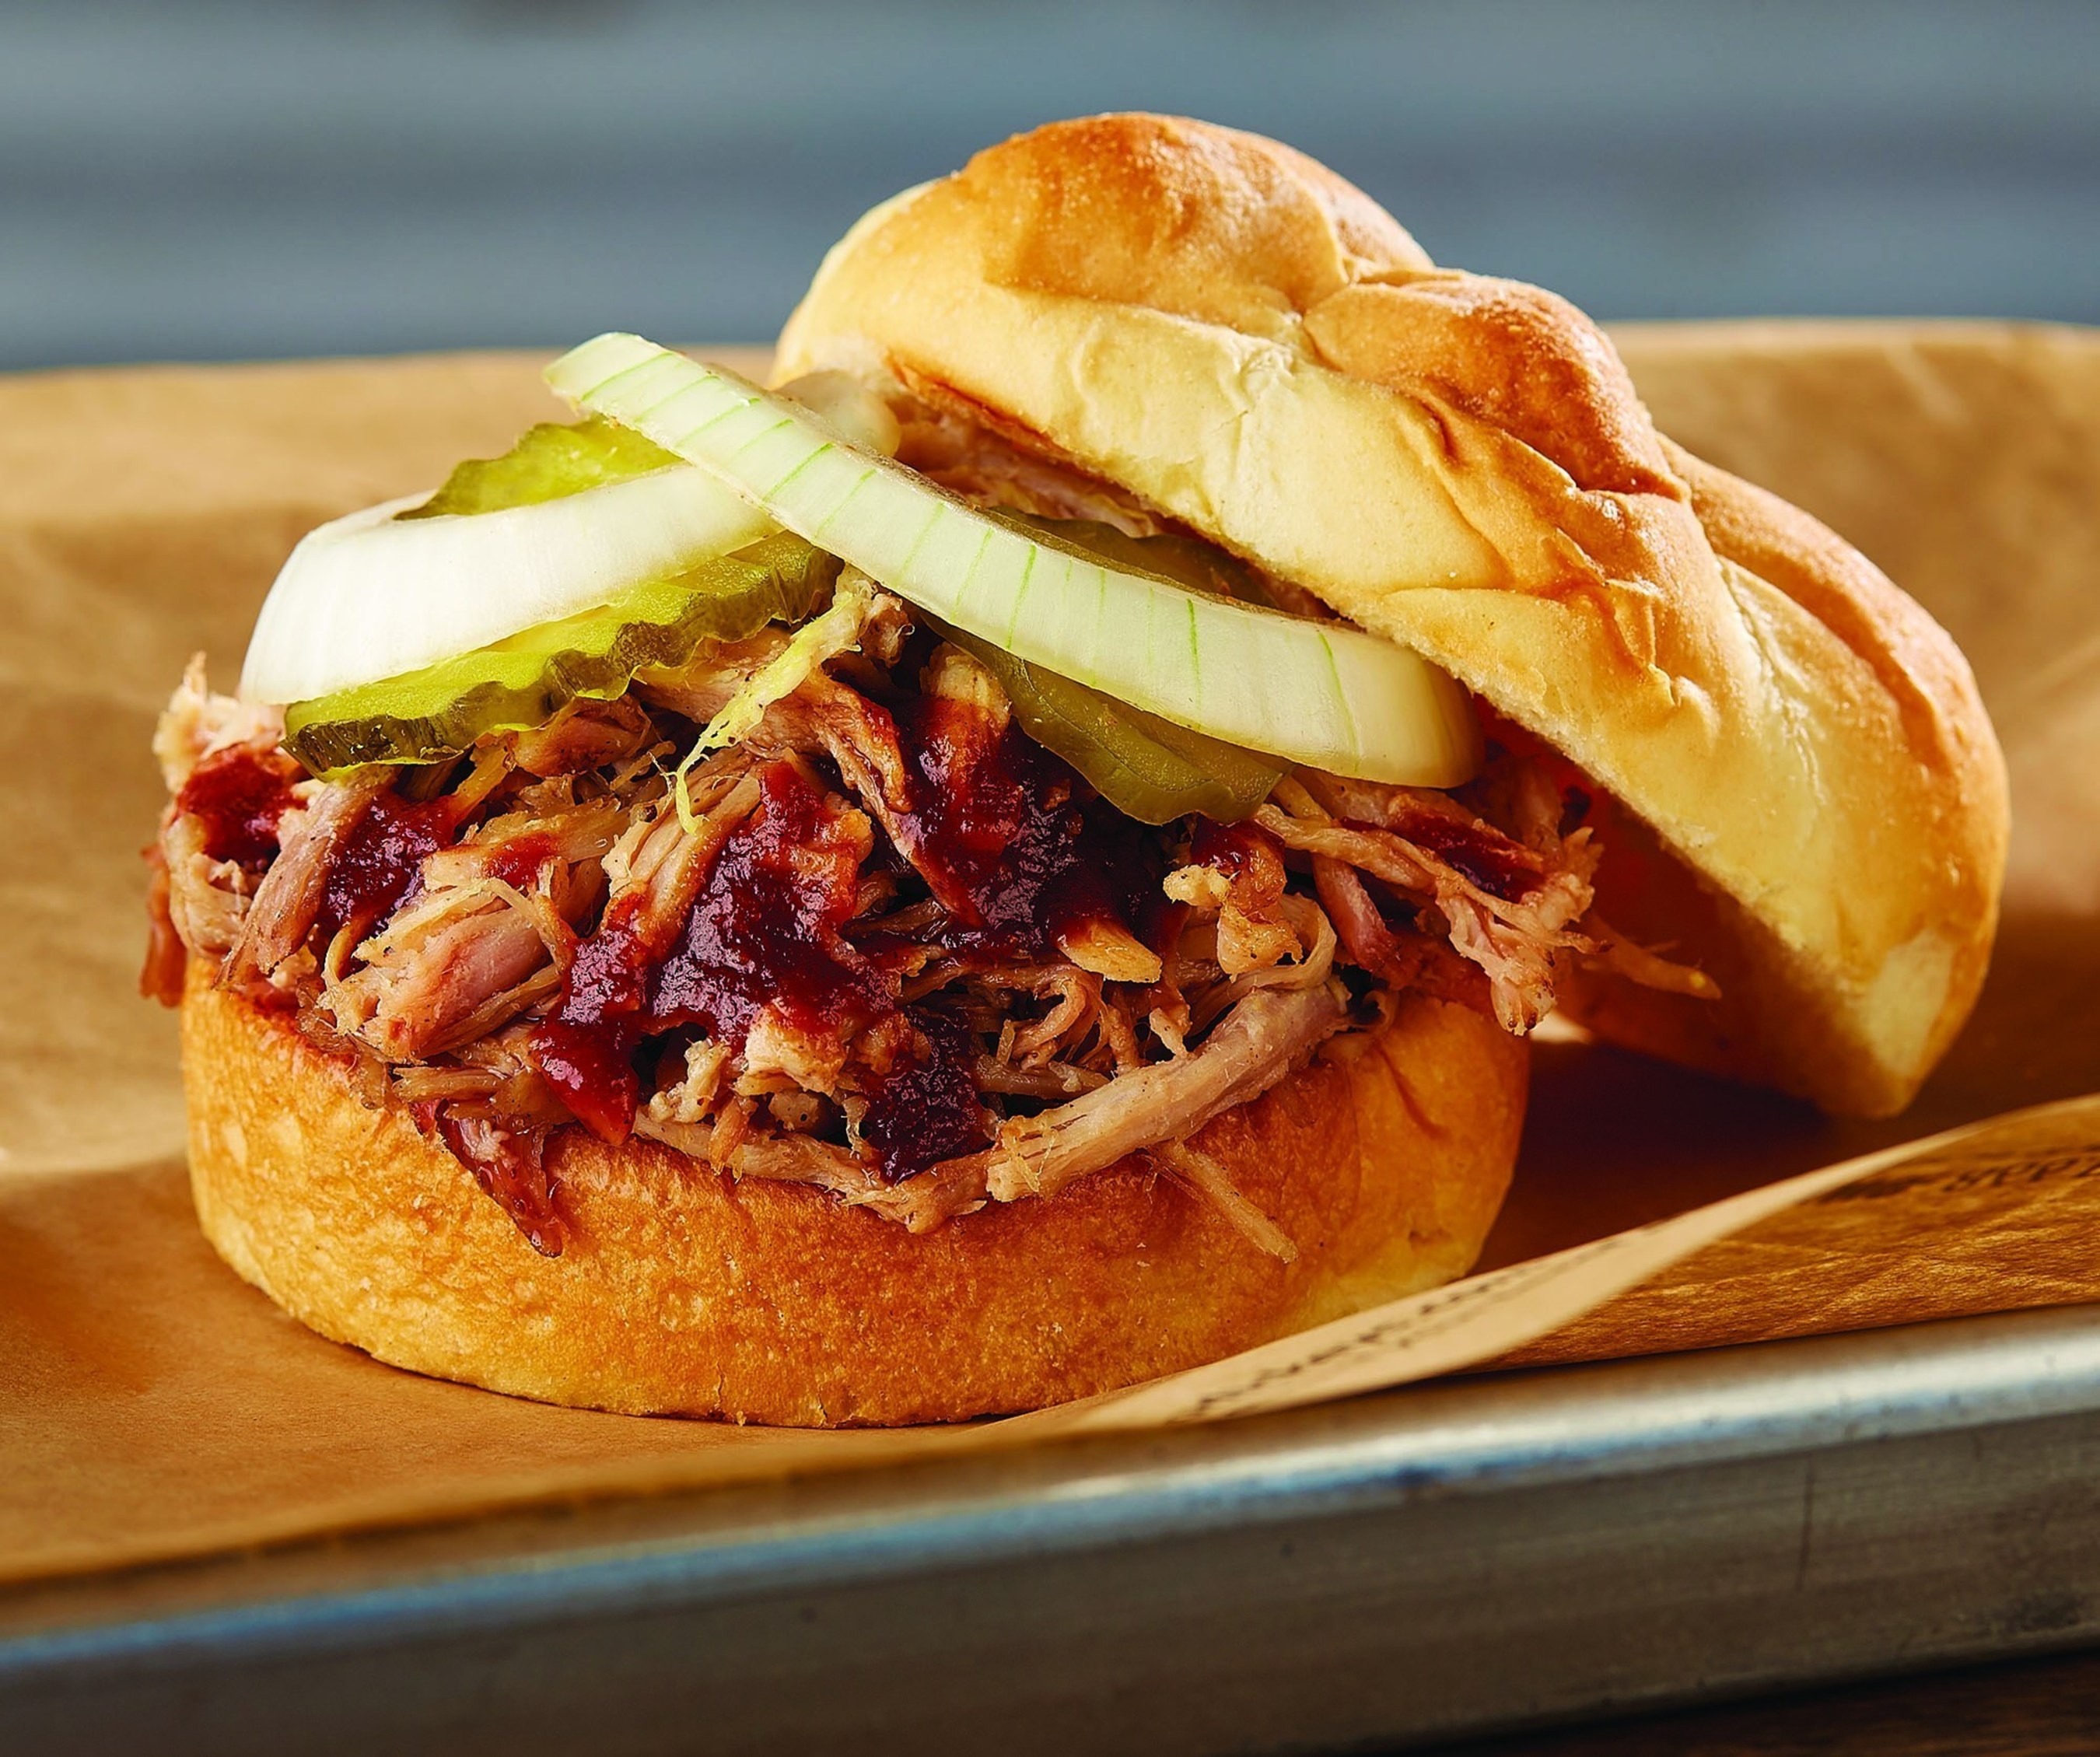 Dickey's Barbecue Pit arrives to Macomb Township on Thursday with a three day grand opening. Location serves up $2 pulled pork sandwiches on Saturday when three lucky guests win free barbecue for an entire year!